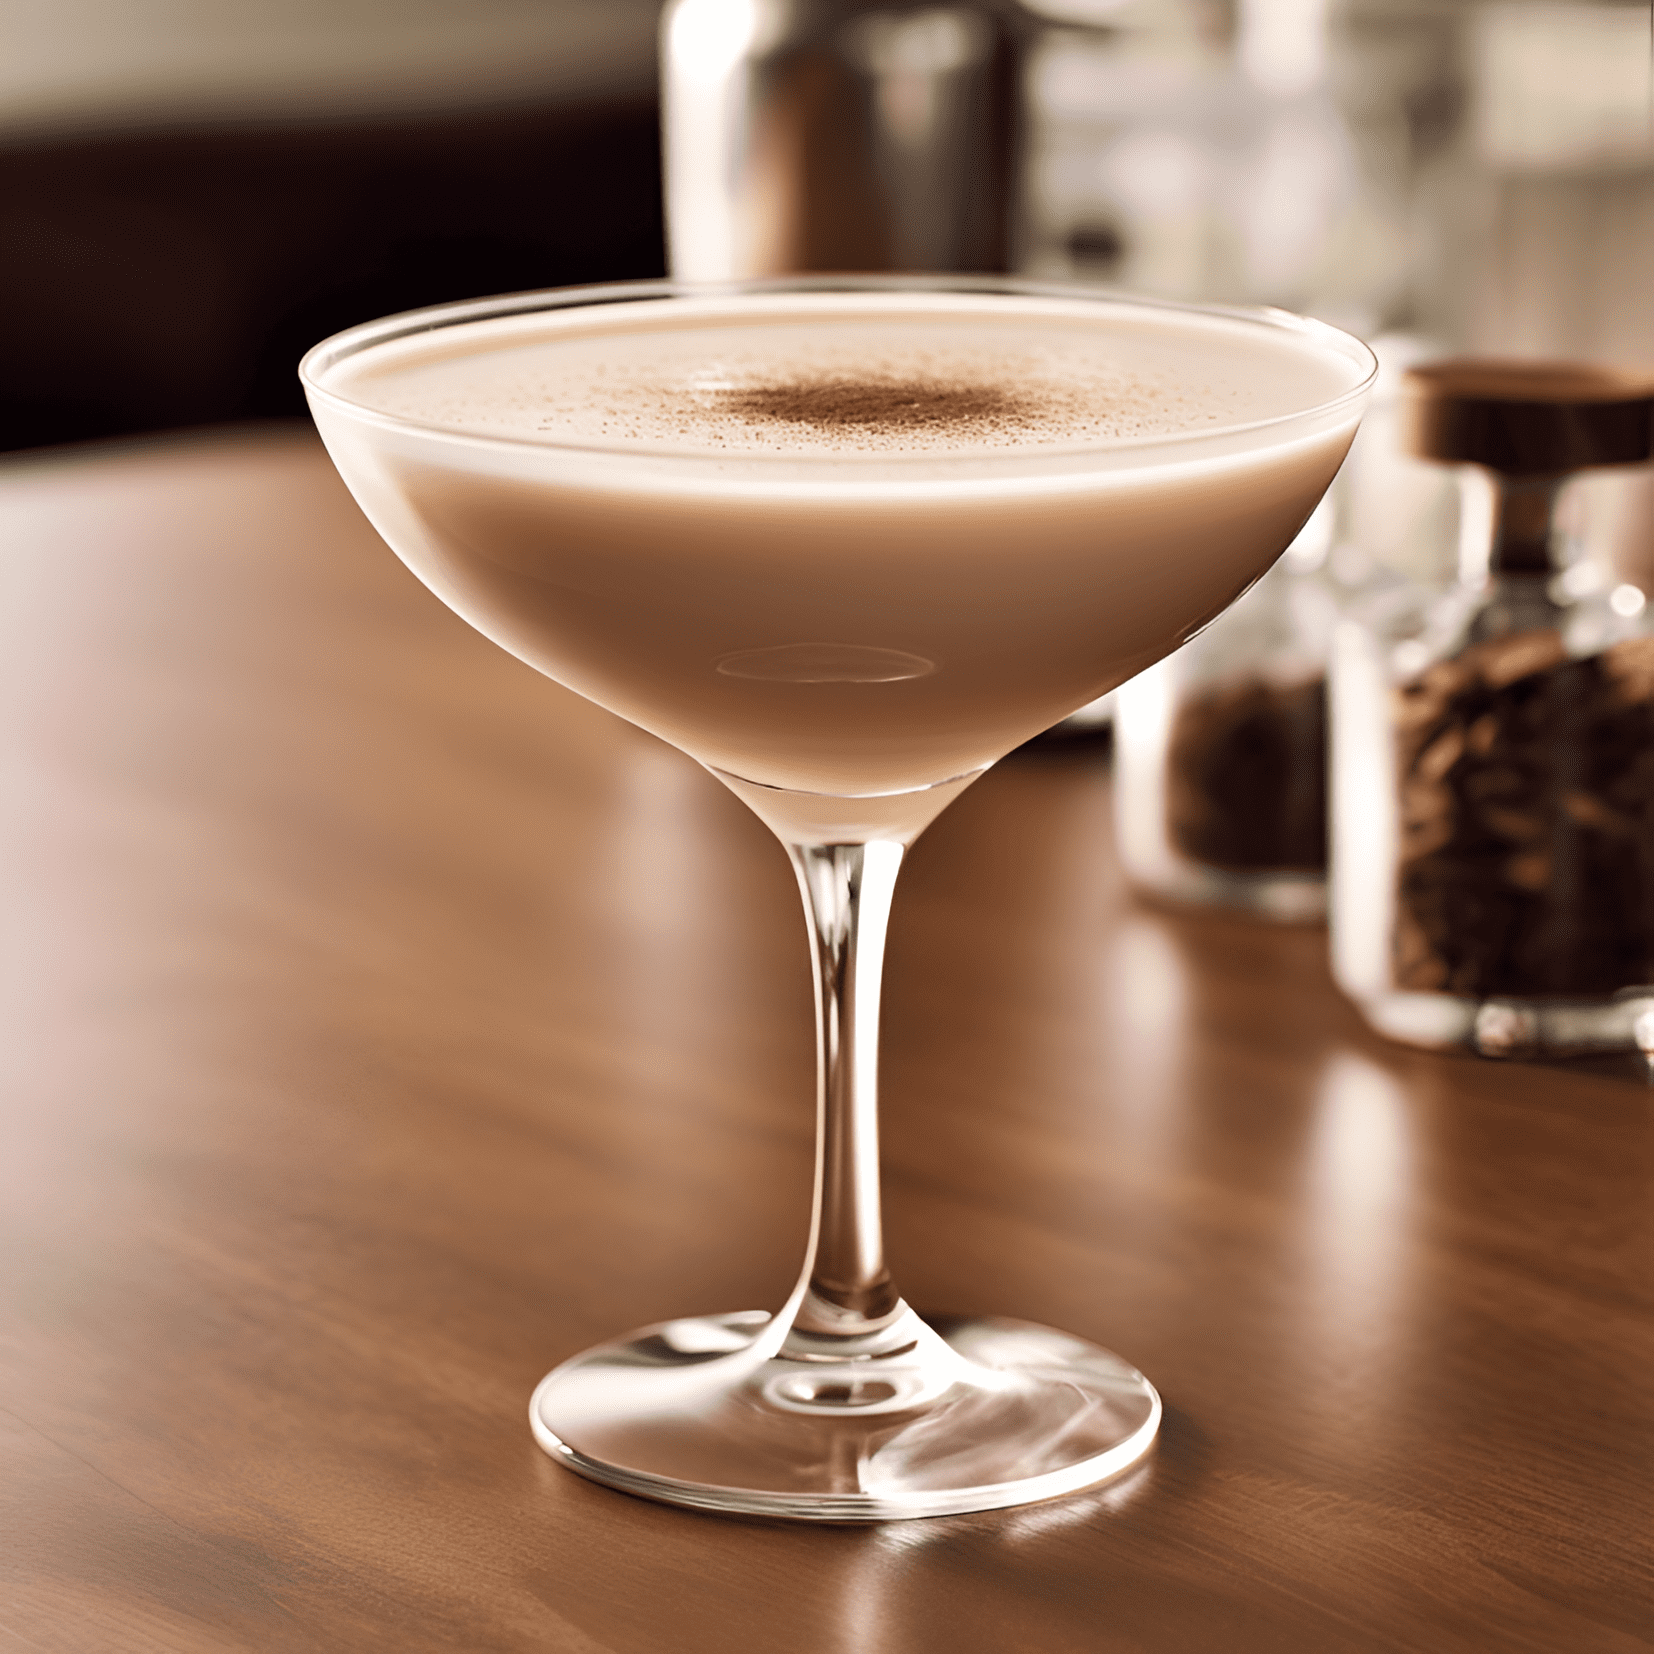 The Brandy Alexander is a rich, creamy, and sweet cocktail with a hint of nuttiness from the crème de cacao. It has a velvety texture and a warming, comforting taste that is perfect for sipping on a cold night.